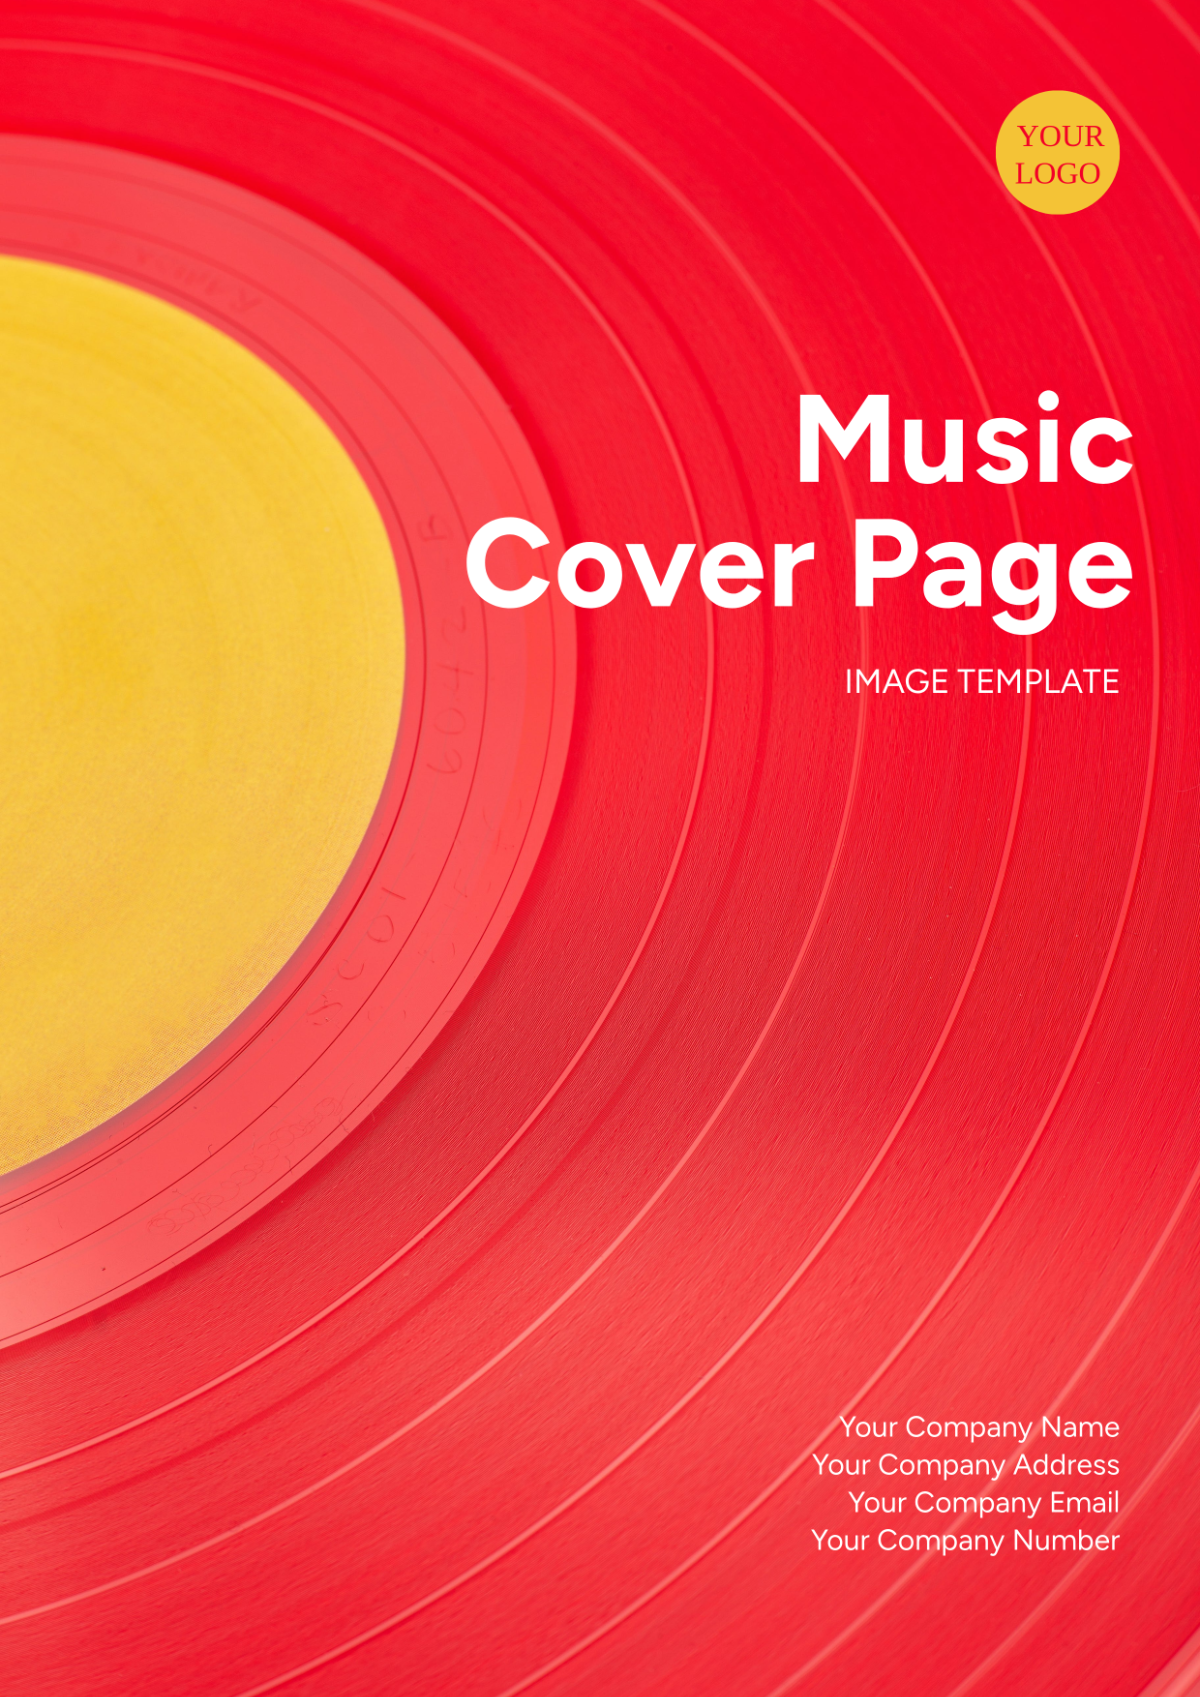 Music Cover Page Image